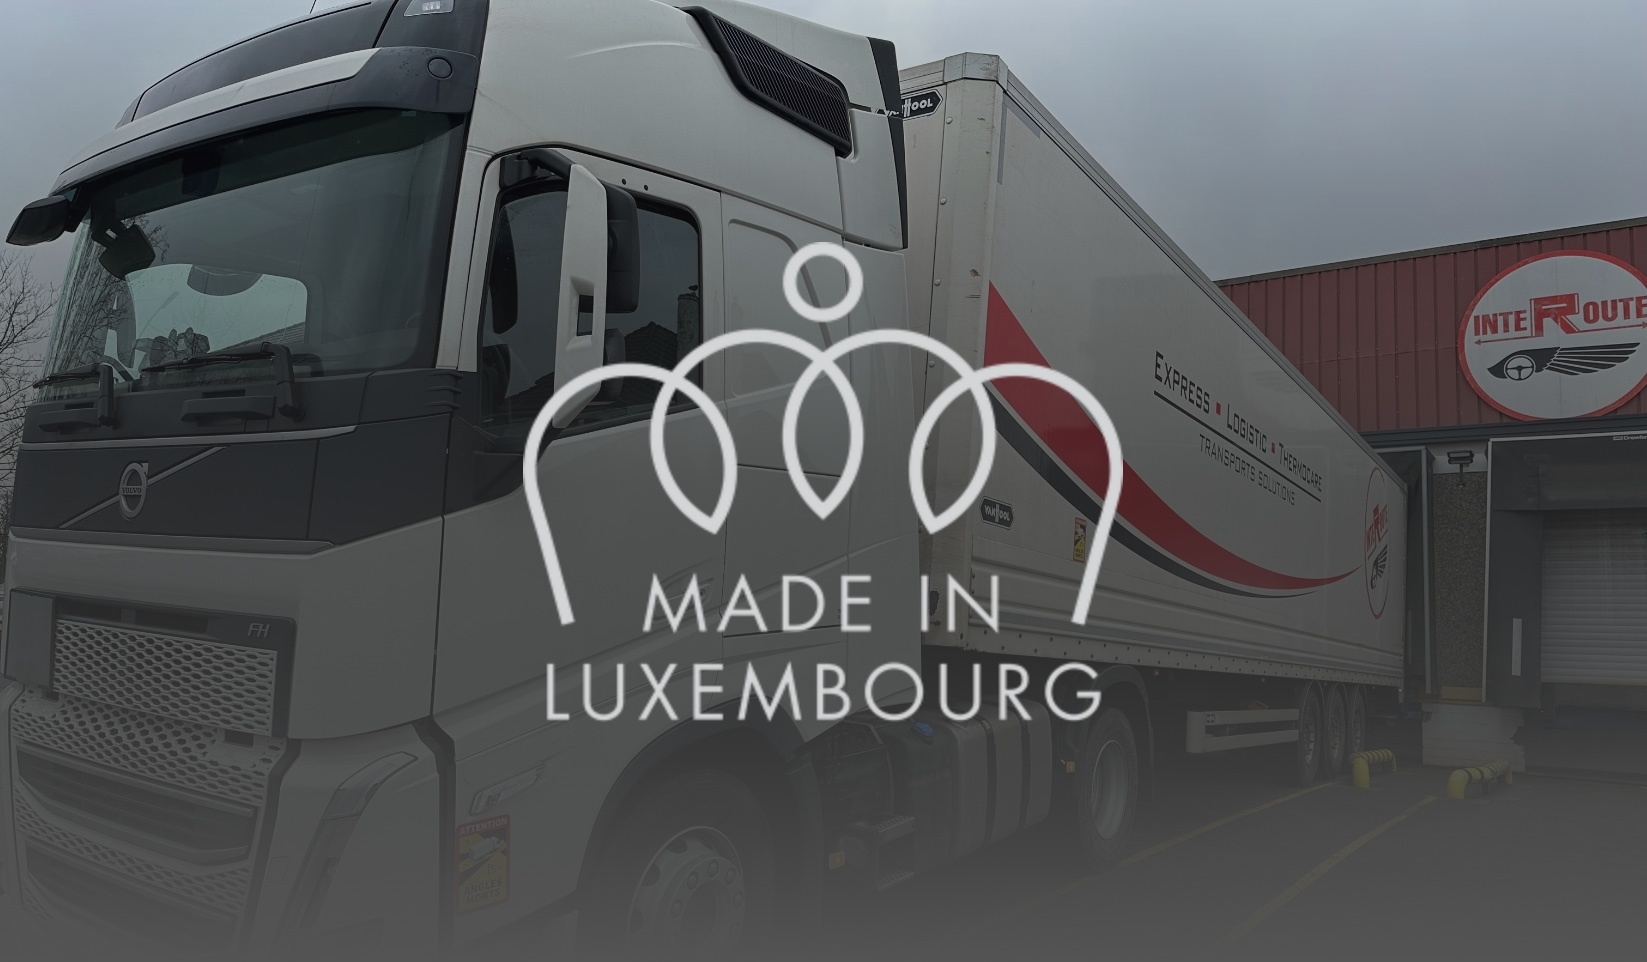 Interoute labellisé Made in Luxembourg